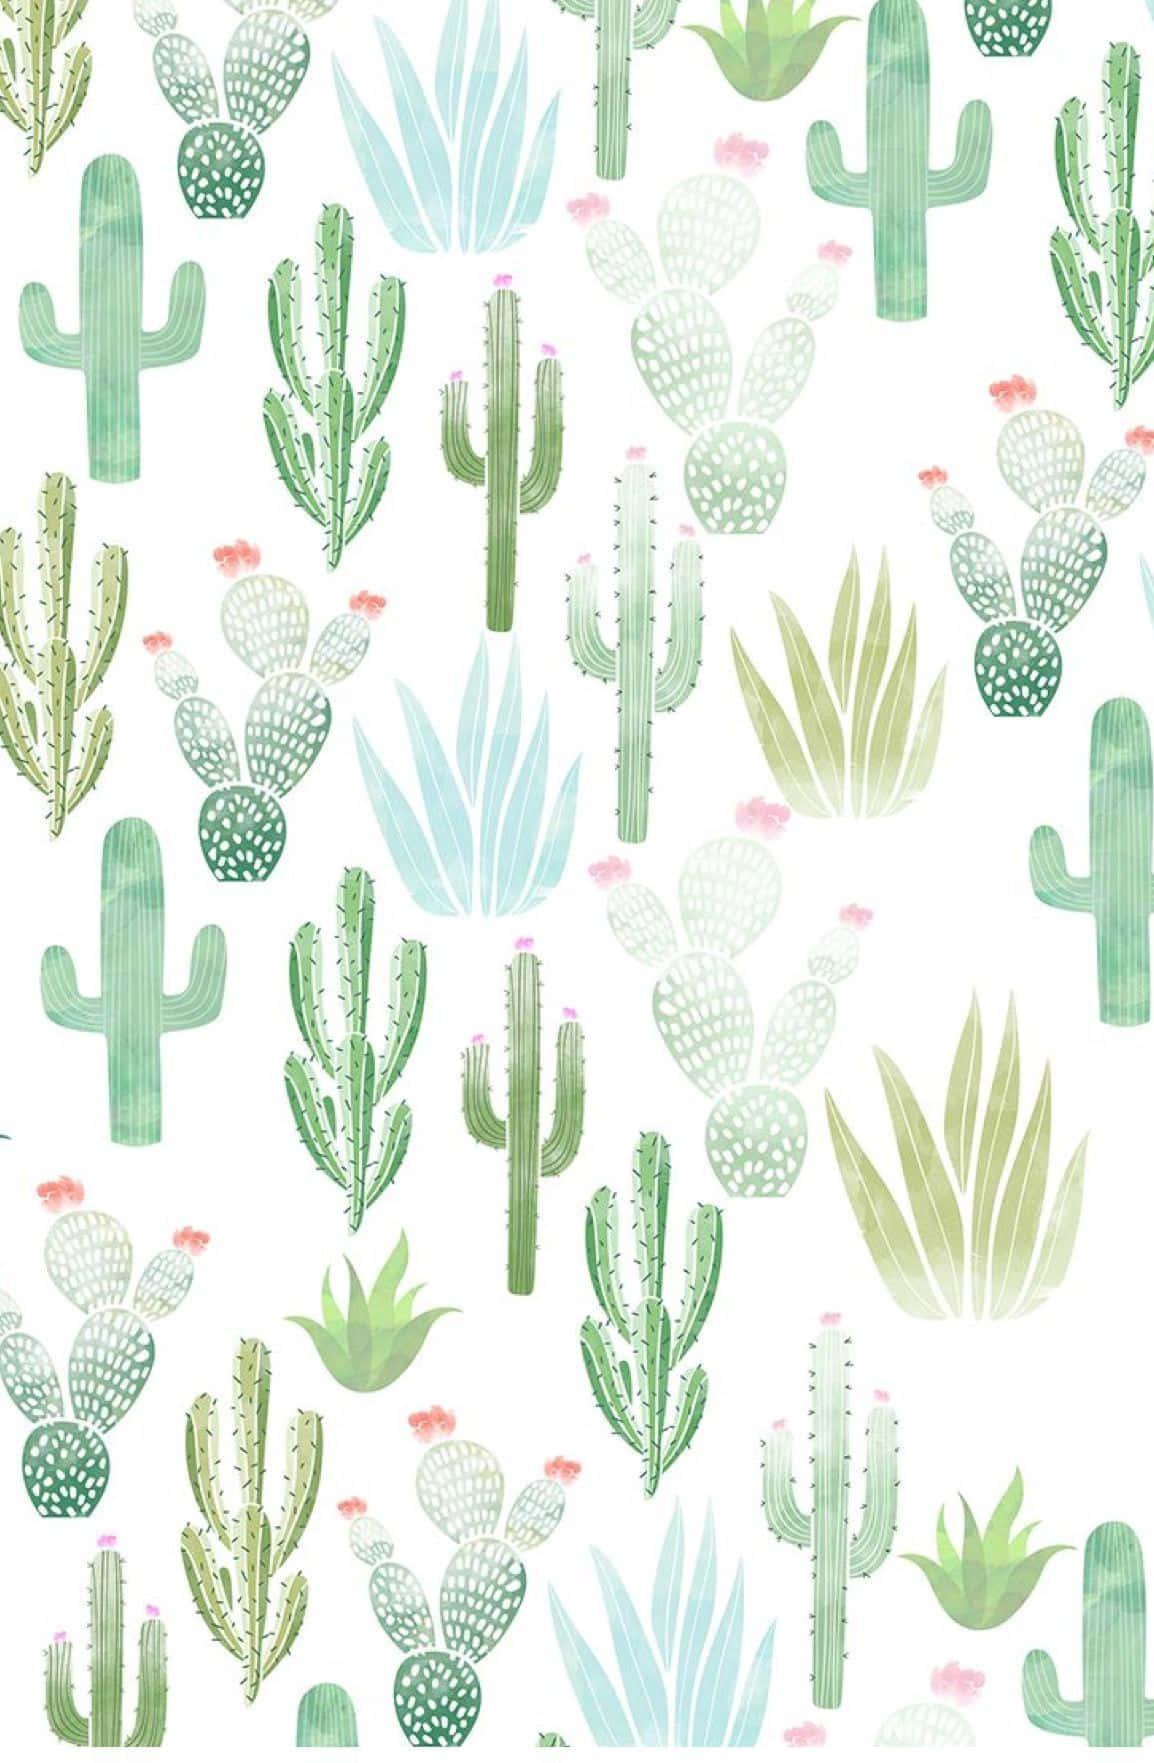 Embrace the Desert with a Cactus iPhone Wallpaper